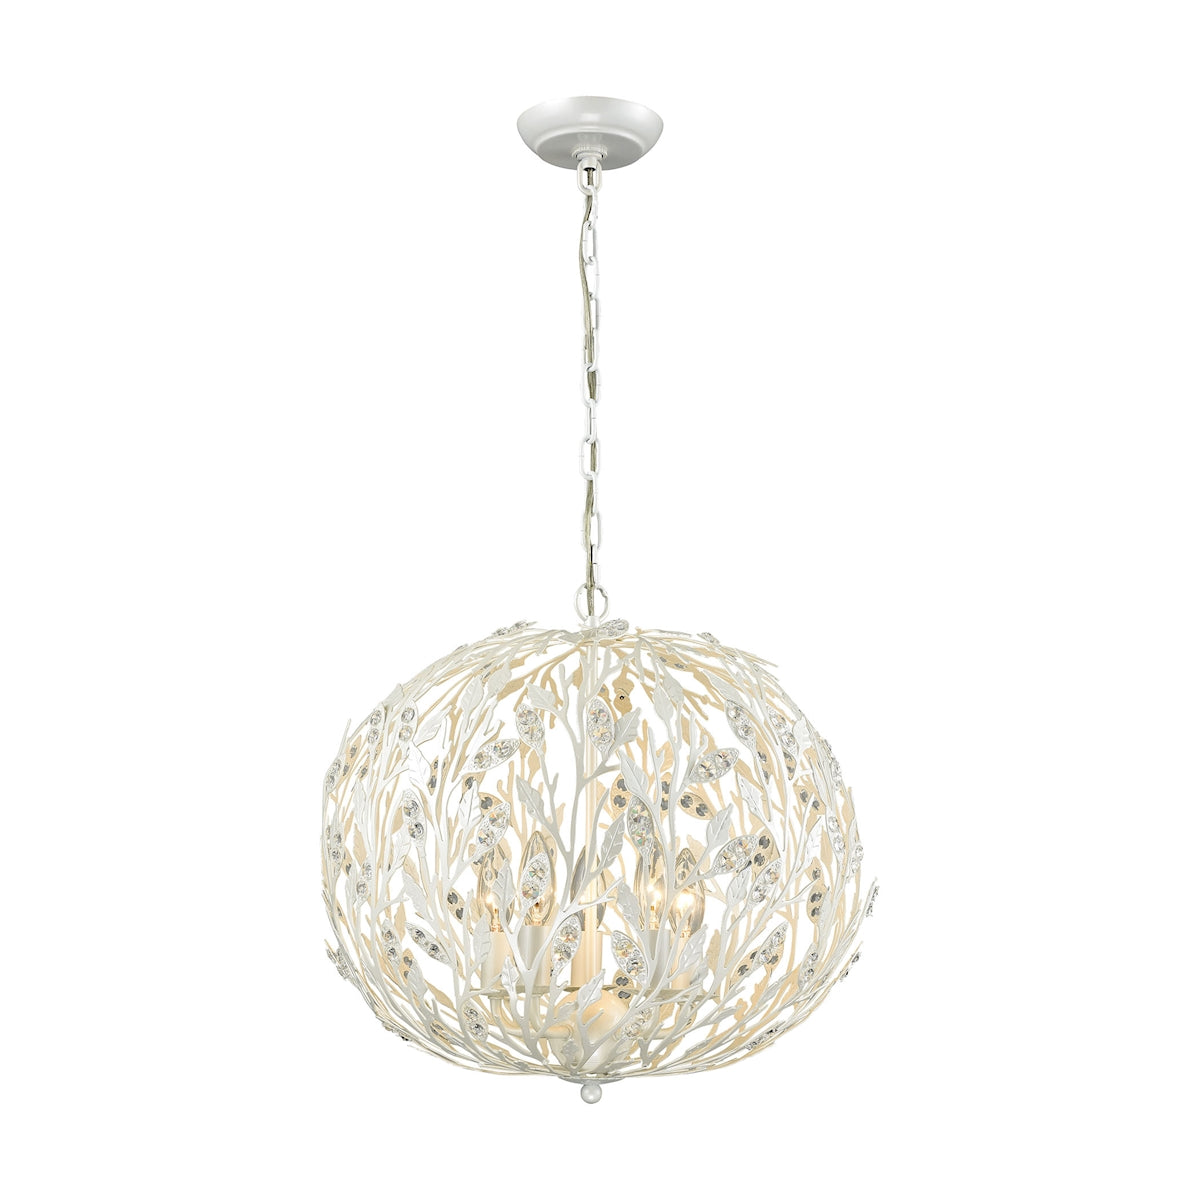 Trella 5-Light Chandelier in Pearl White with Clear Crystal and Openwork Metal Shade